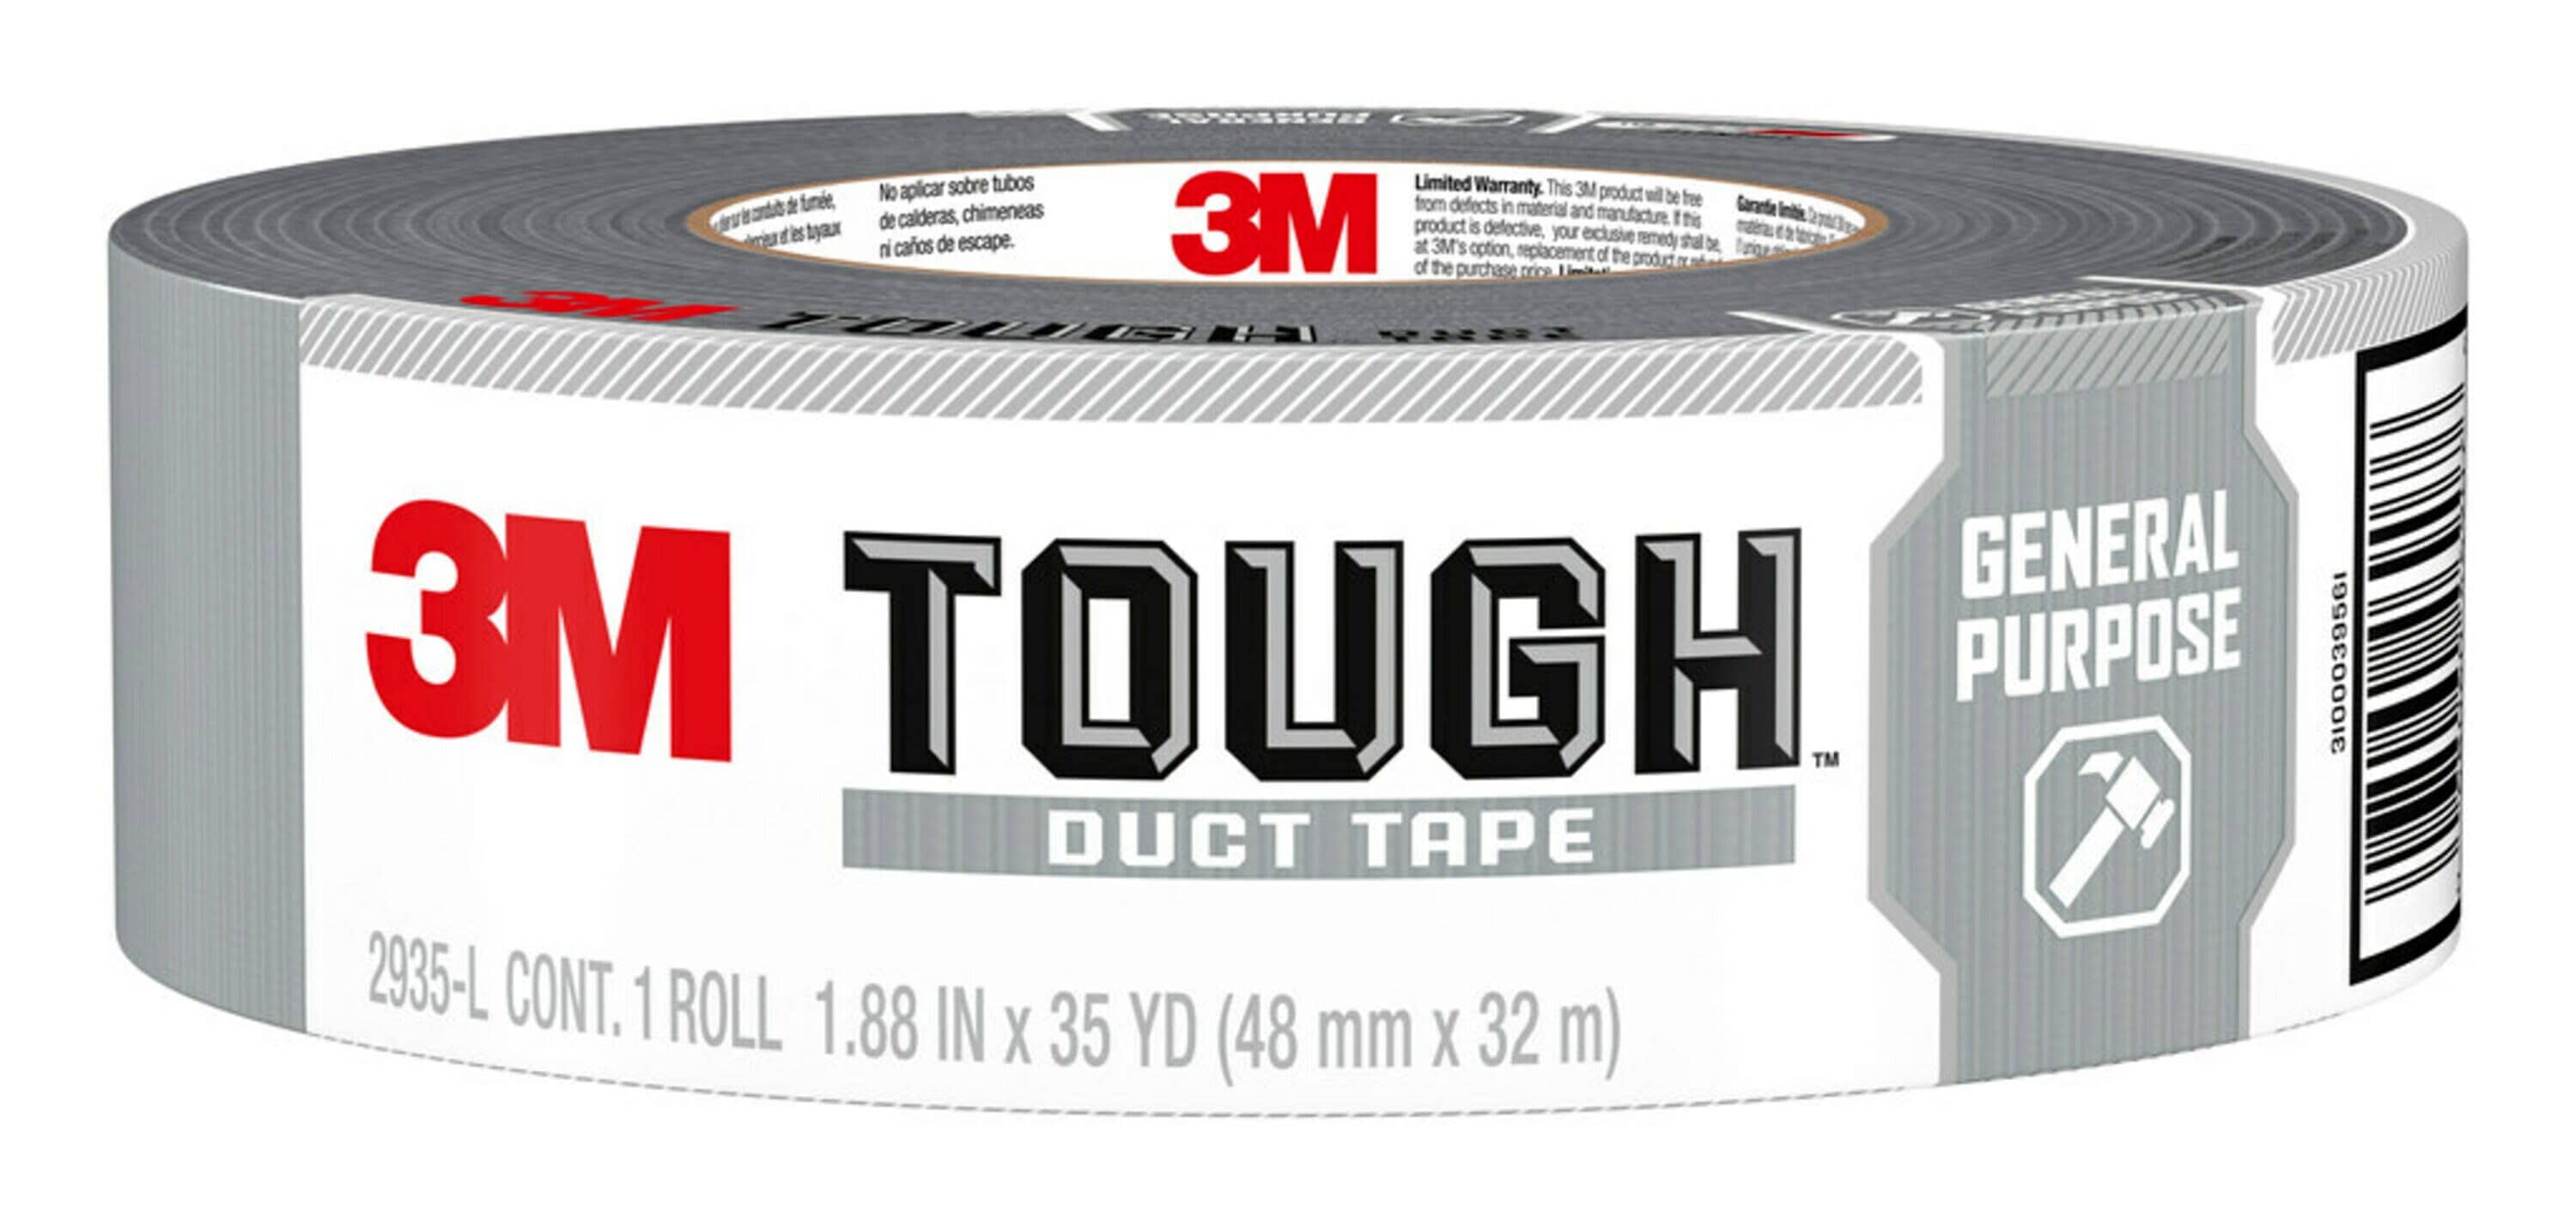 3M Duct Tape General Purpose Utility Gray Rubberized Duct Tape 1.88-in x 35  Yard(s) in the Duct Tape department at